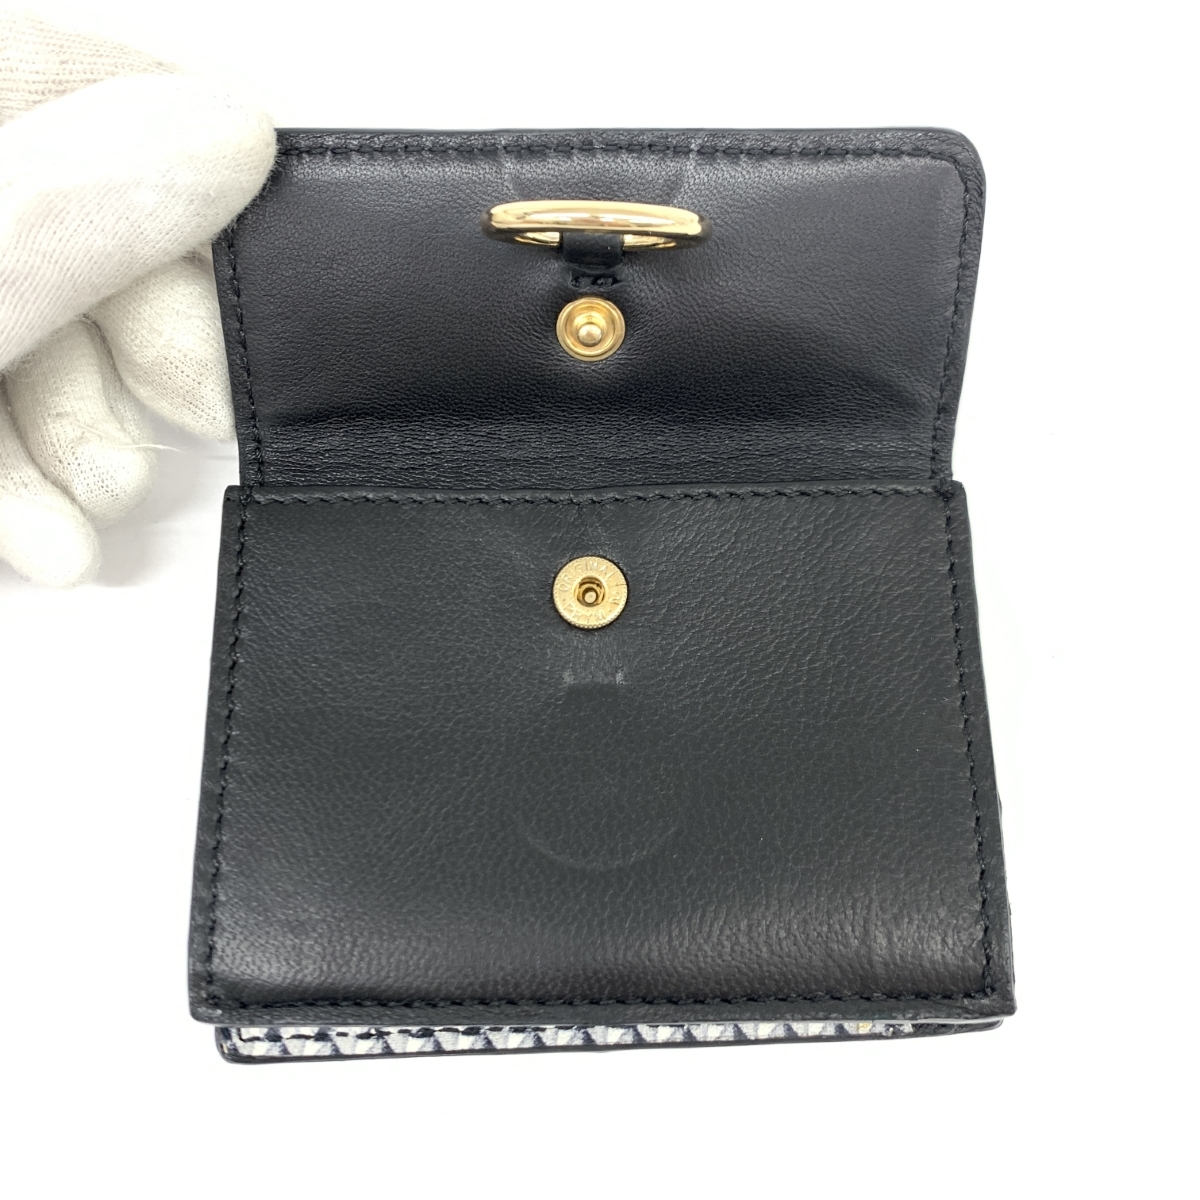  excellent *repetto Repetto card-case * coin case * black sheep leather lady's card-case pass case 